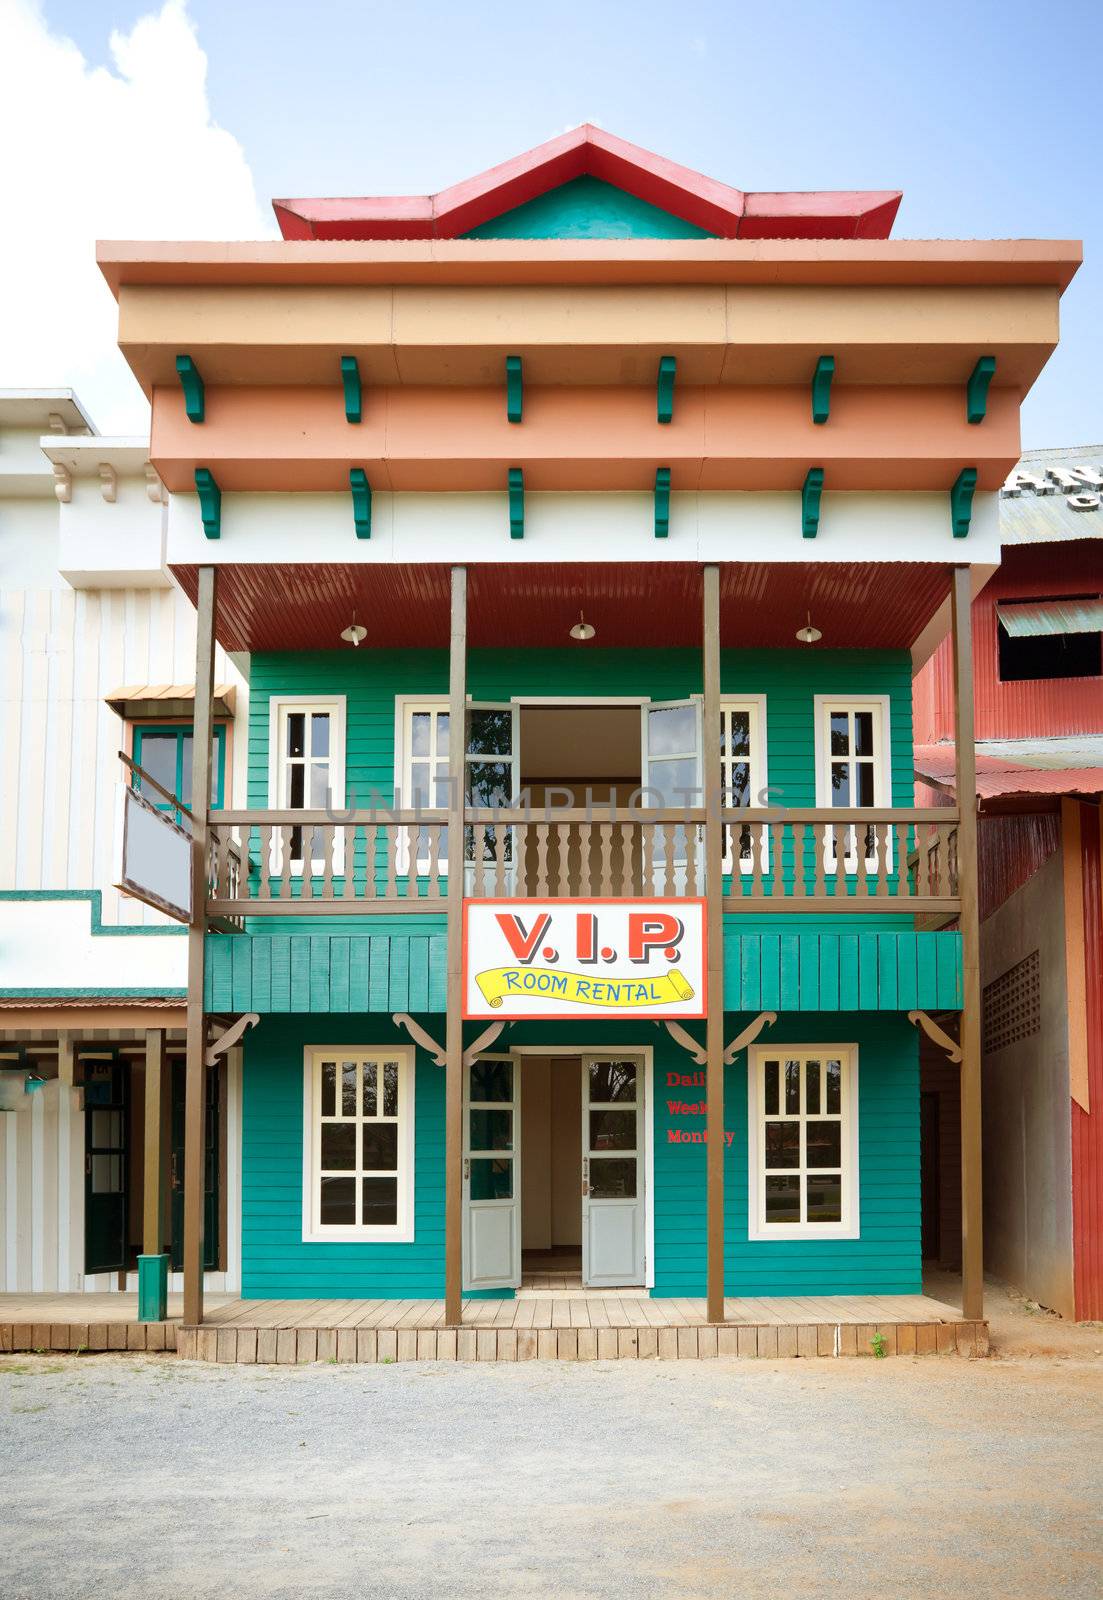 Old western hotel and room rental with blue sky